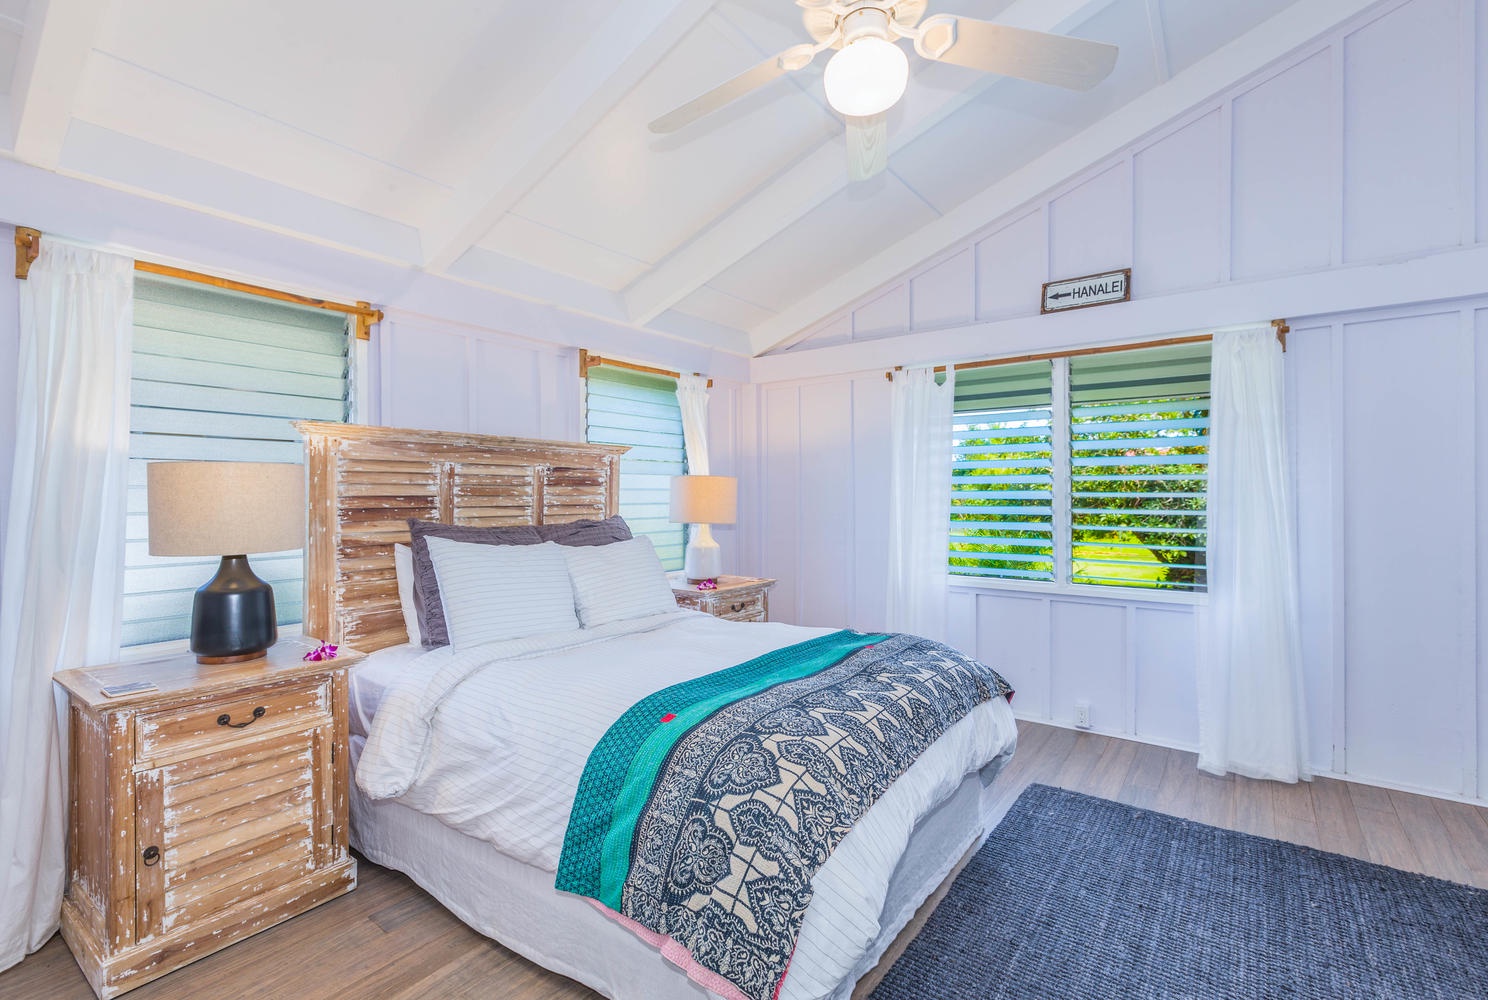 Hanalei Vacation Rentals, Hale Kanani (Kaua'i) TVNC 1342 - Queen bedroom  We have a roll away bed available as well